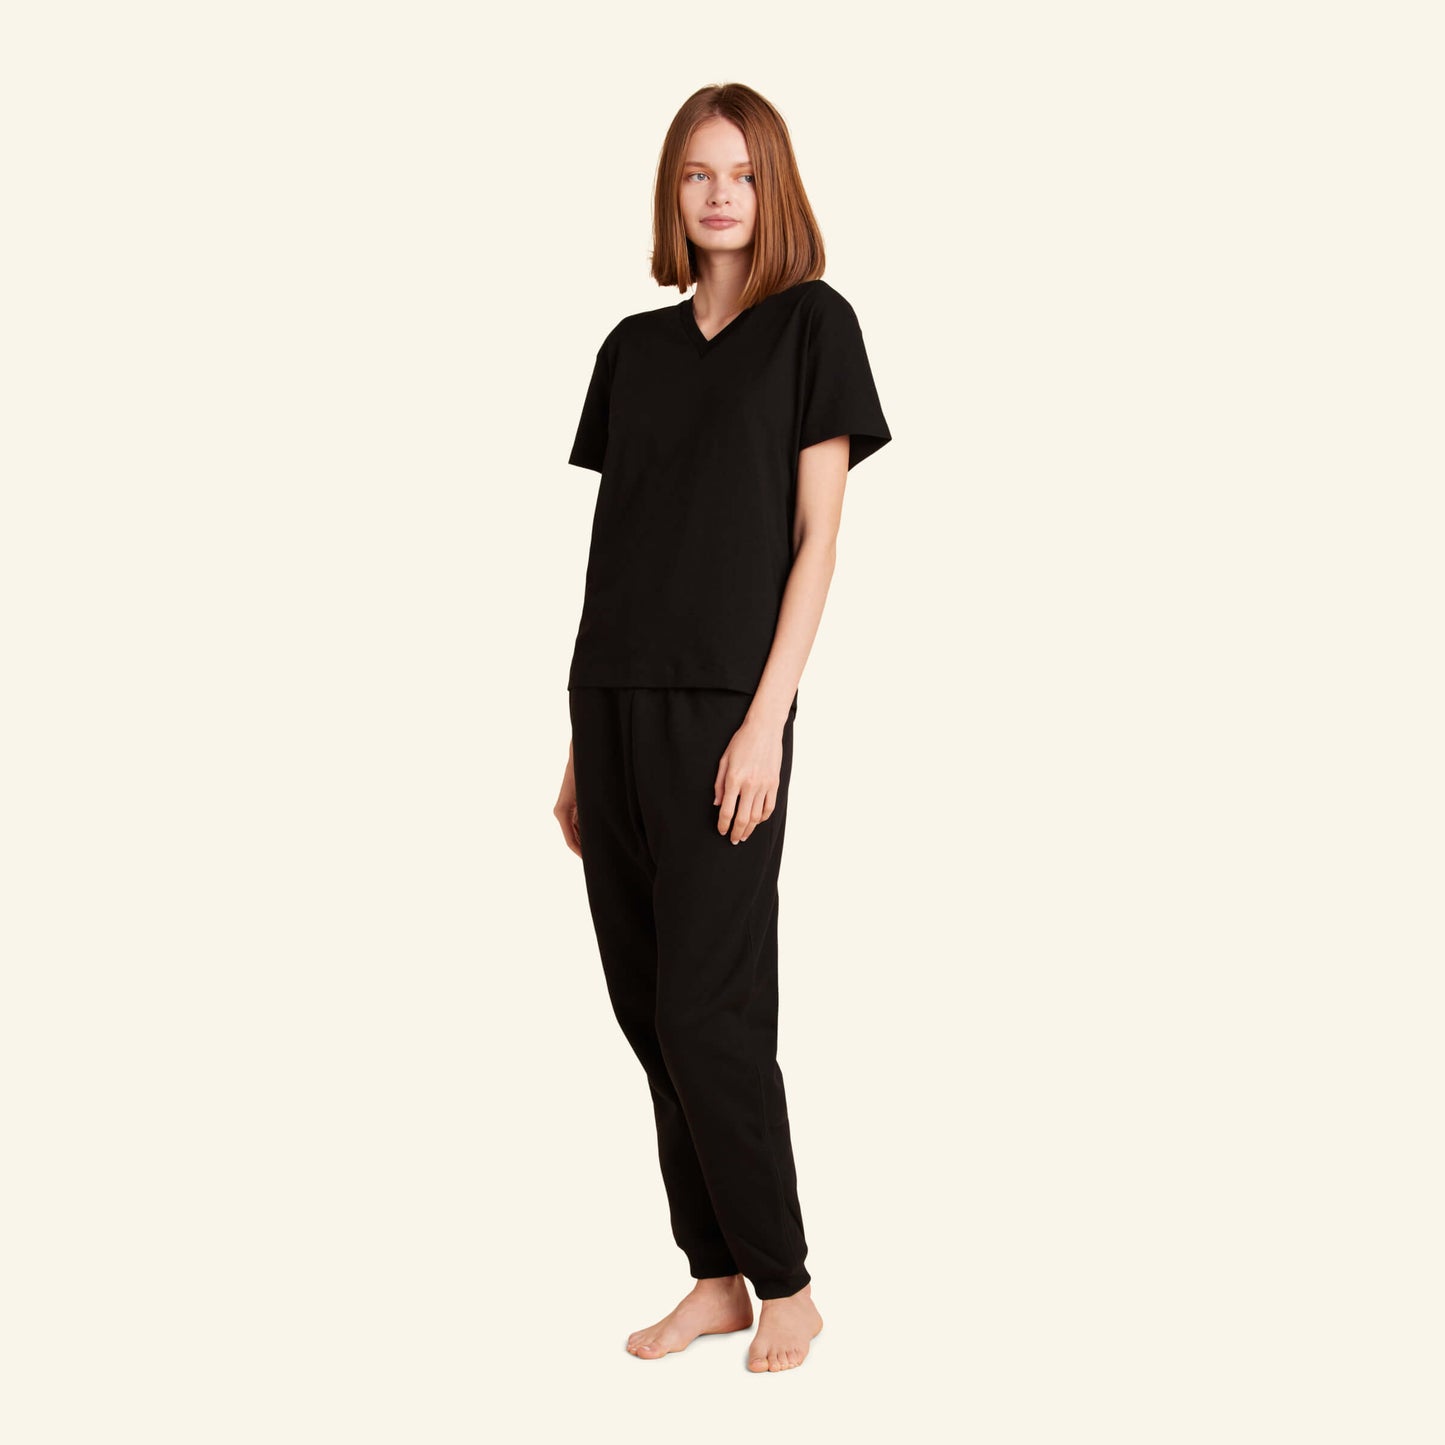 Woman wearing the Slumber Cloud Essential V-Neck made with Outlast® temperature regulation technology to help keep you cool and comfortable throughout the night